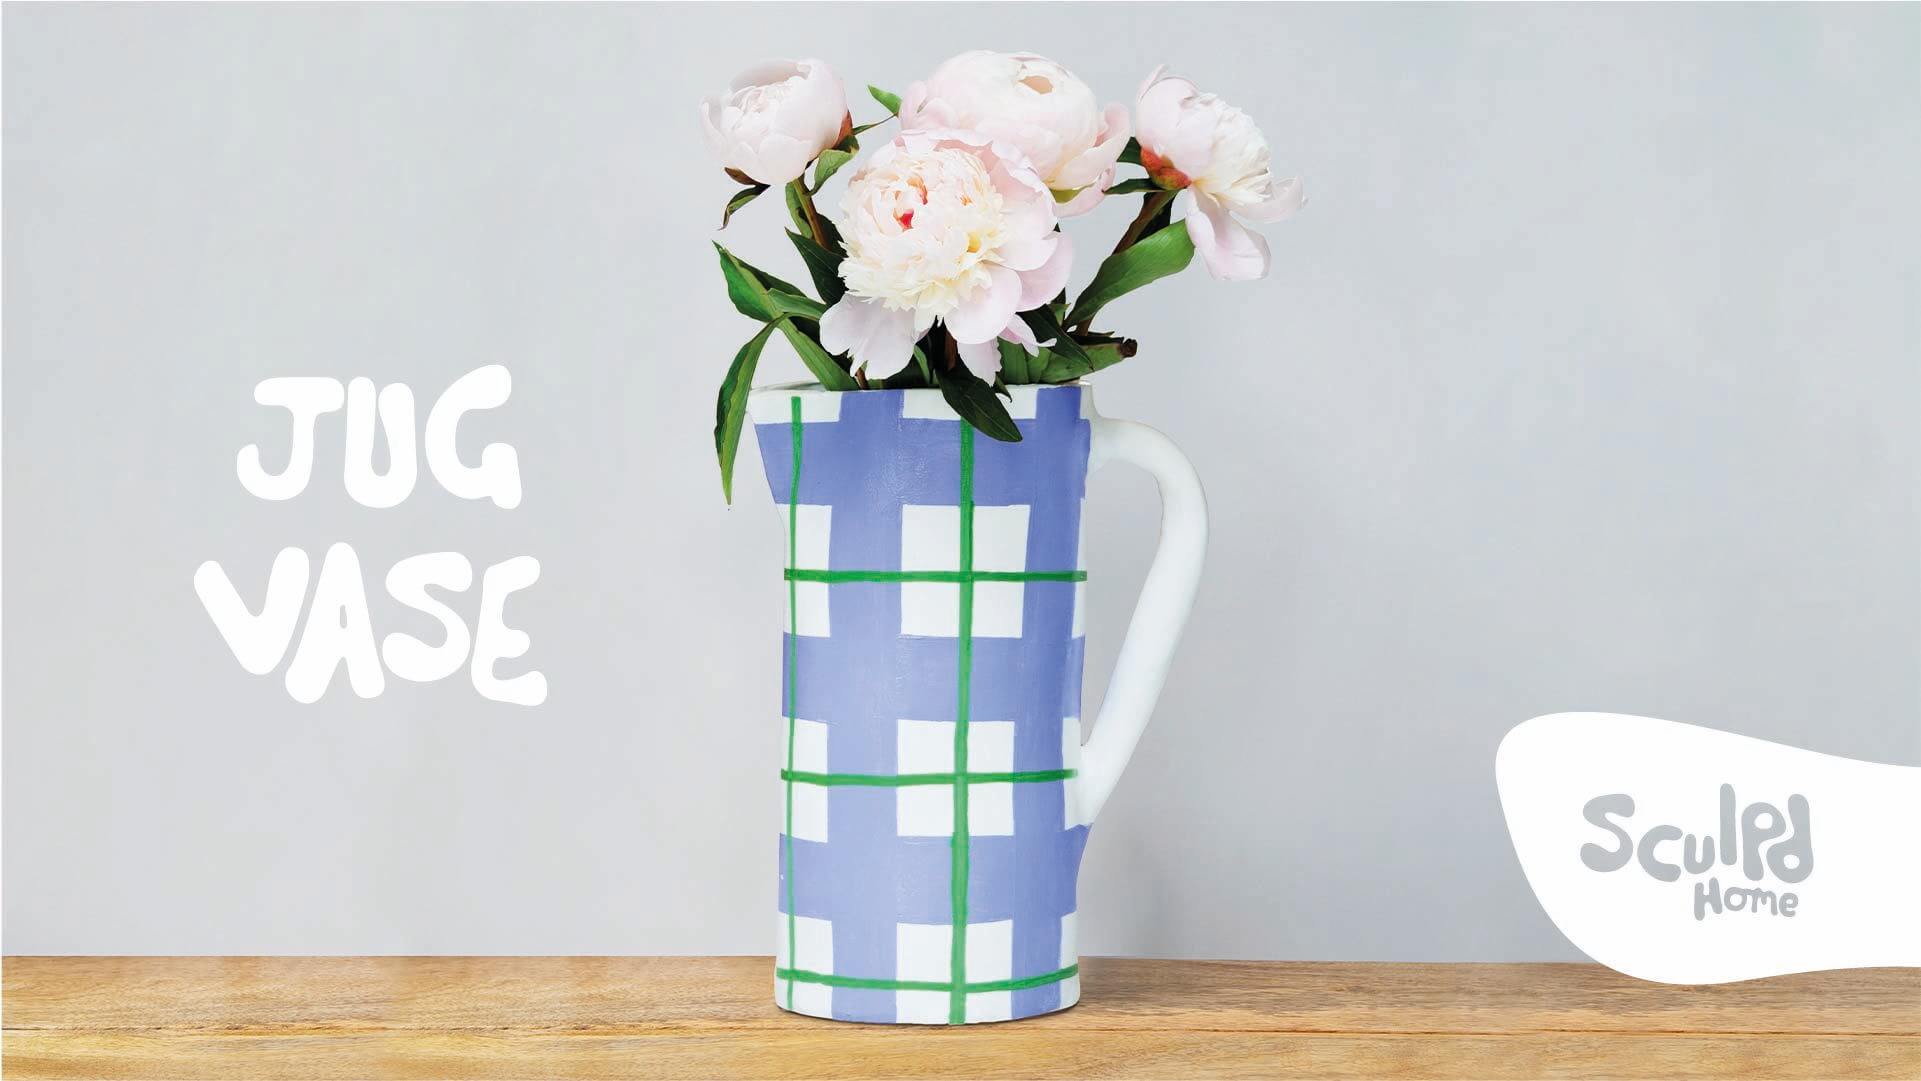 Make Your Own Jug Vase | By Sculpd Home